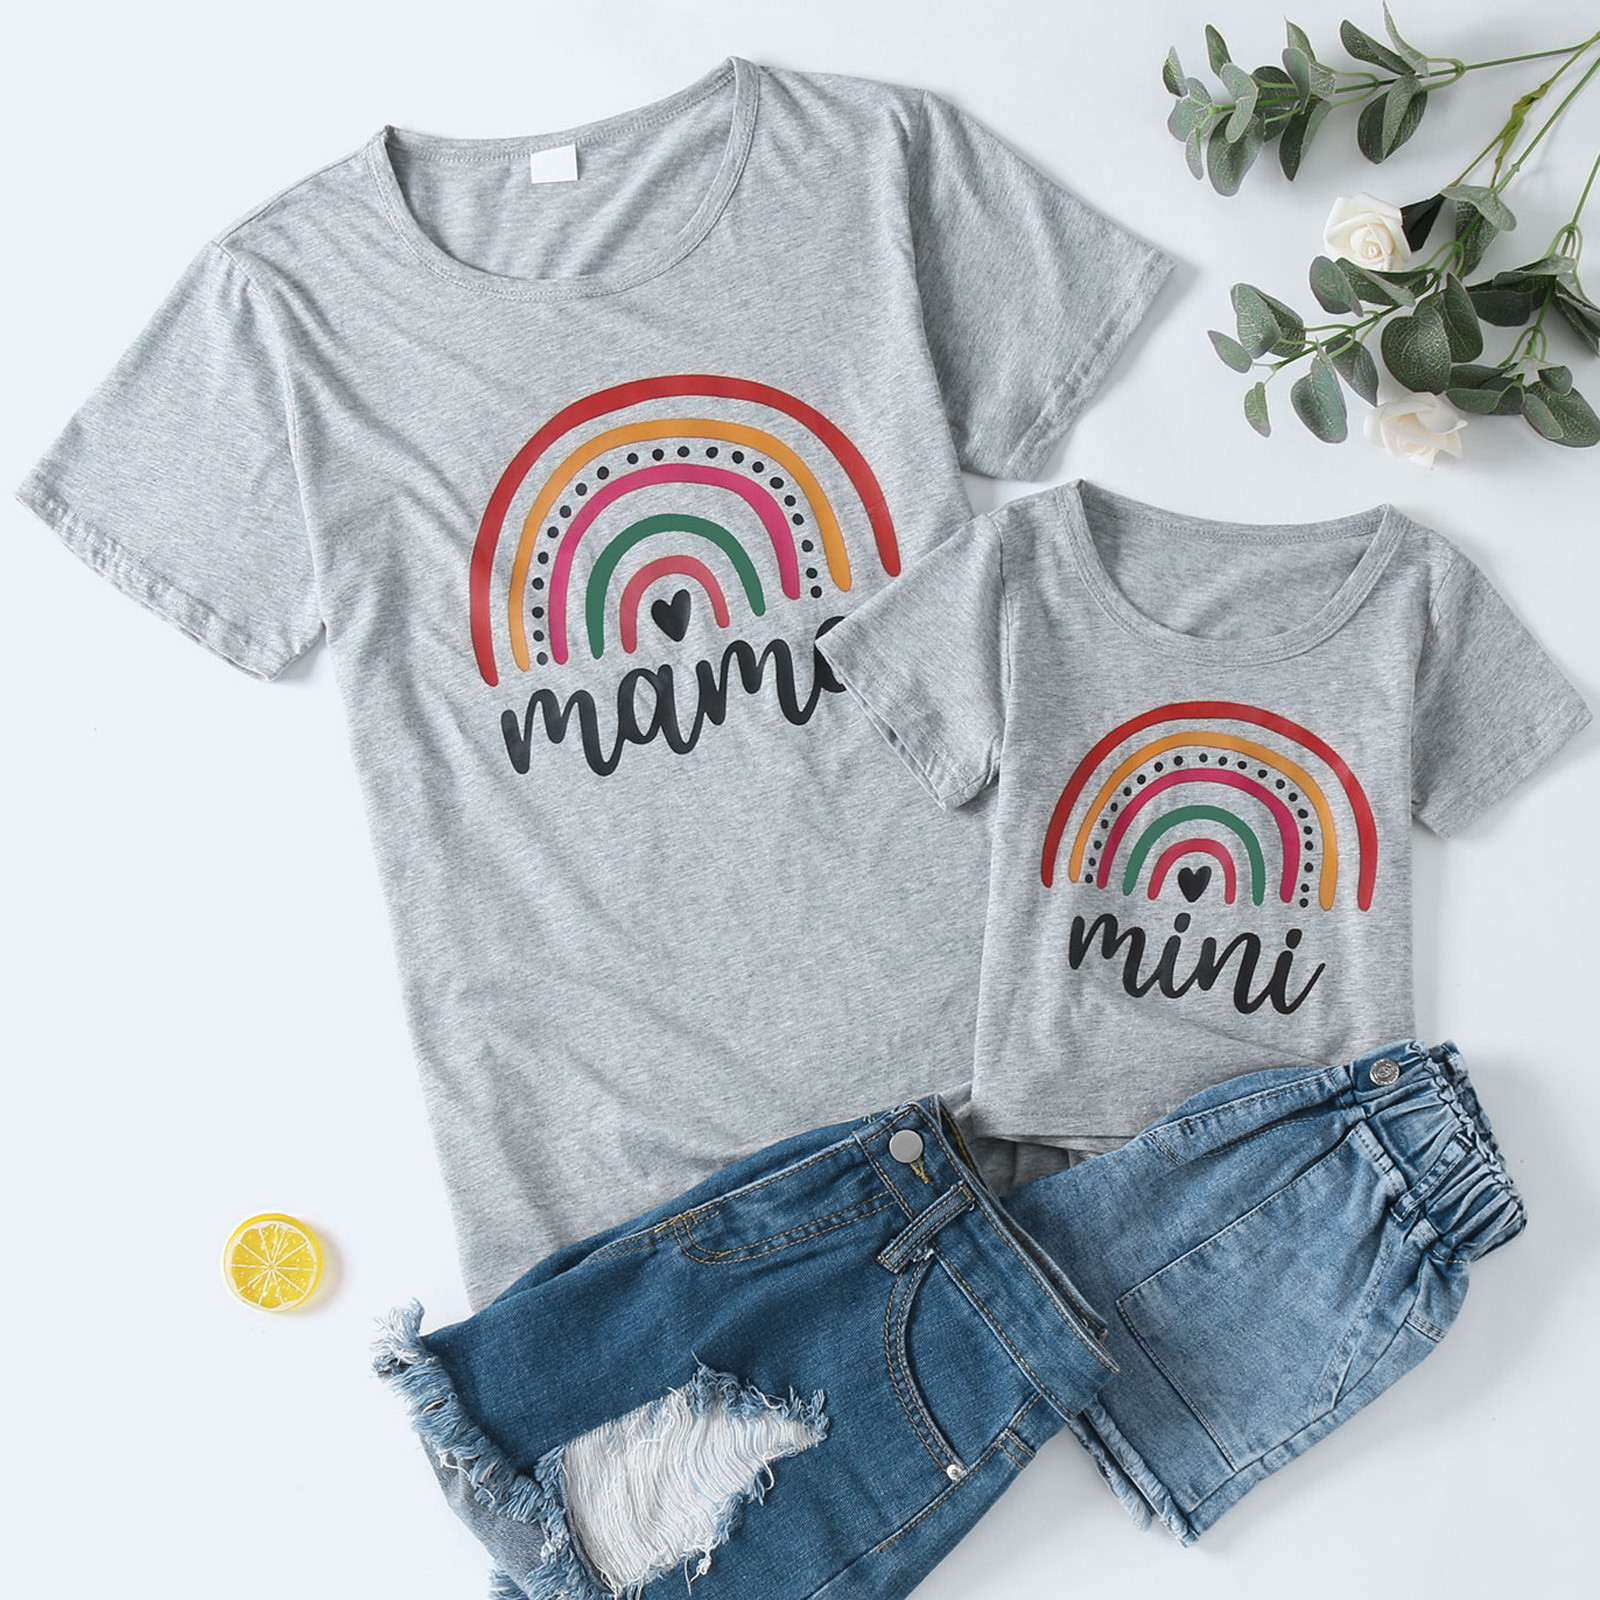 TAIAOJING Mommy and Me Outfits T Short Tops And Blouse Casual Kids Me Summer Clothes Shirt Outfits Sleeve Family Baby Mommy For Toddler Rainbow Tee Girls Girls Tops 2-3 Years - image 2 of 9